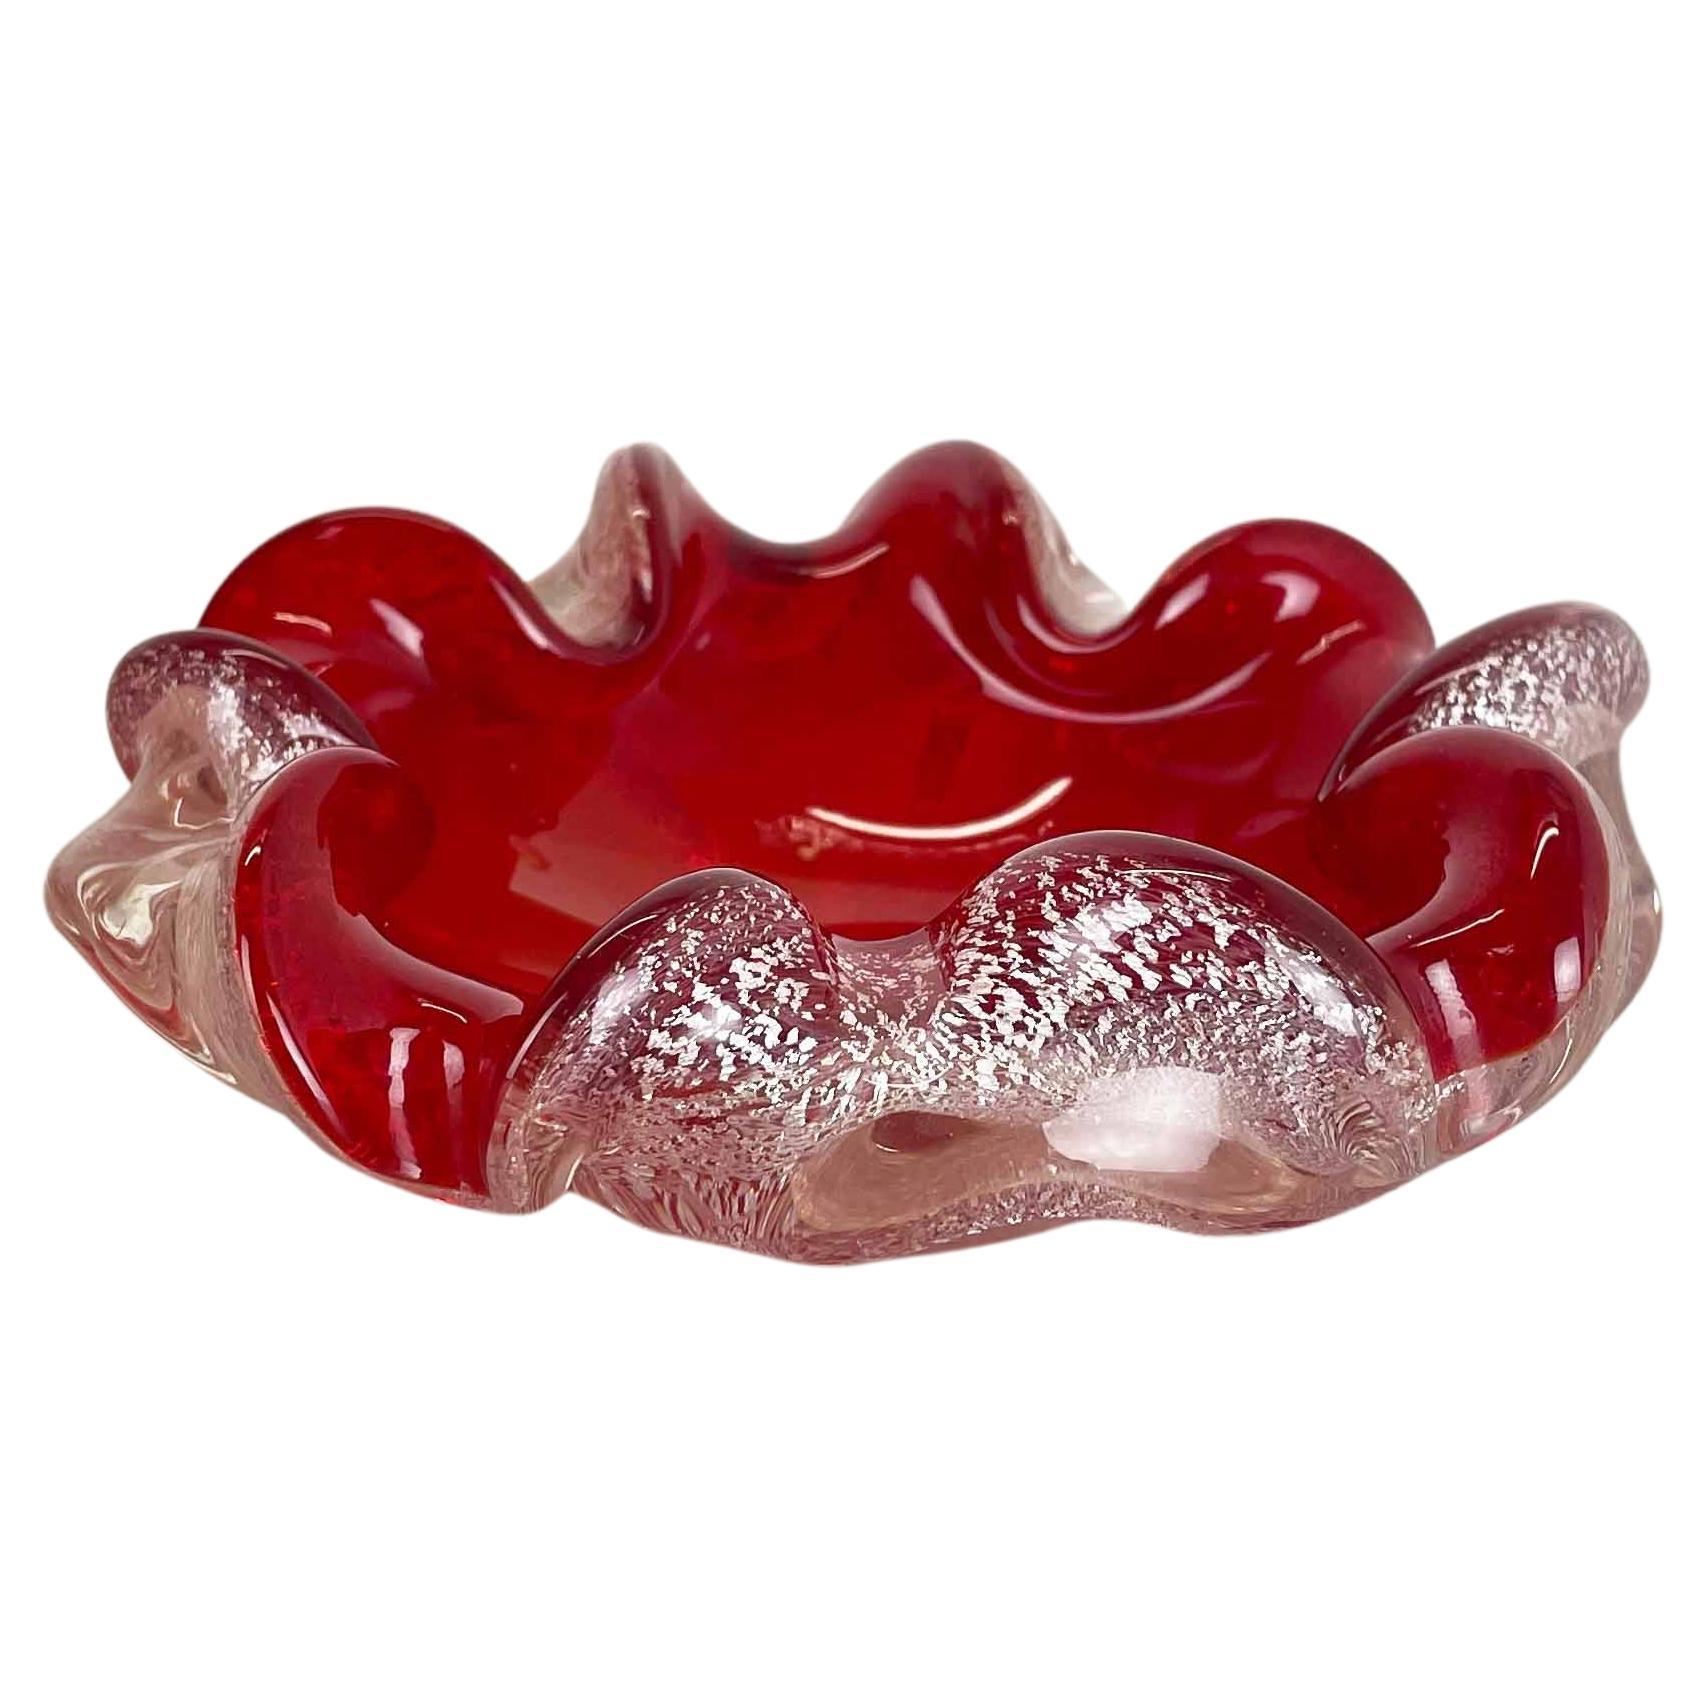 Murano Glass "Floral" Bowl Element Shell Ashtray by Barovier + Toso, Italy, 1970